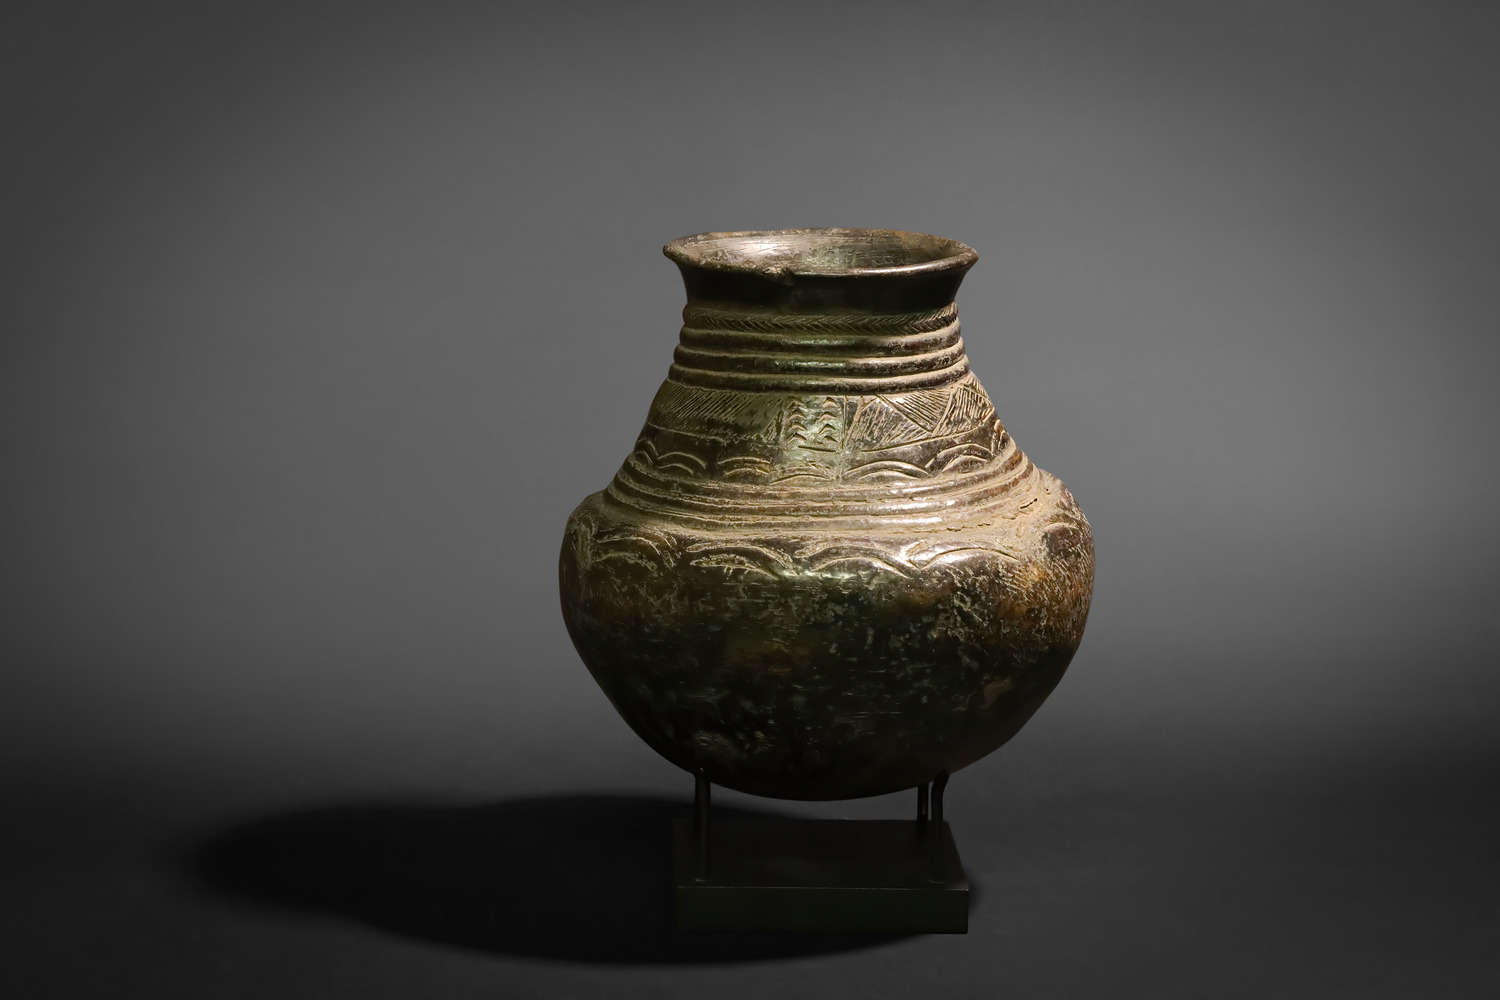 Ritual Pot: Beer Drinking and Fermentation Vessel (Songye People, Congo)